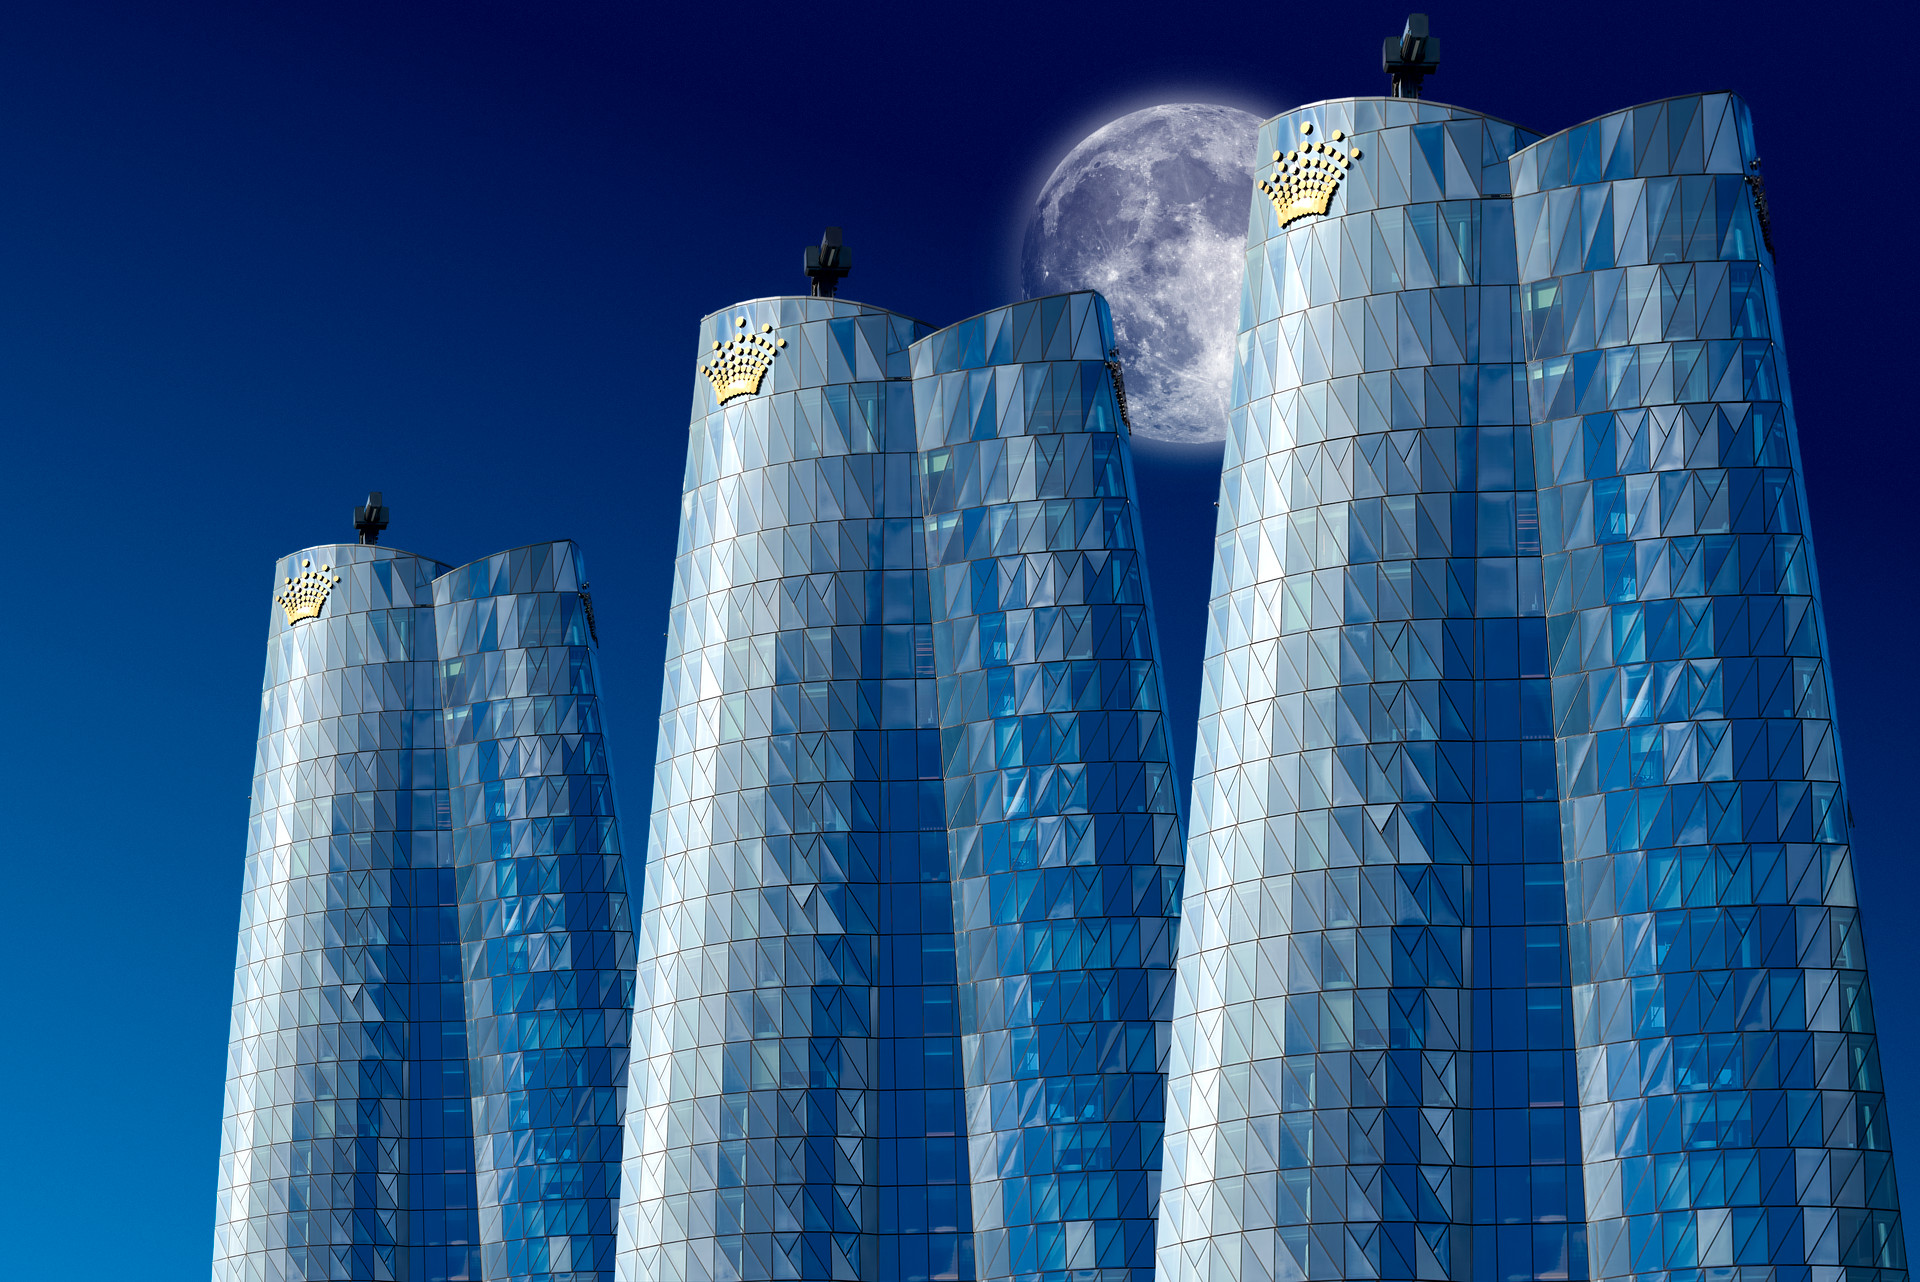 Crown Towers Sydney, Composite Photo, Night Simulation with Moon Rising. By orlandosydney.com OS1_1808